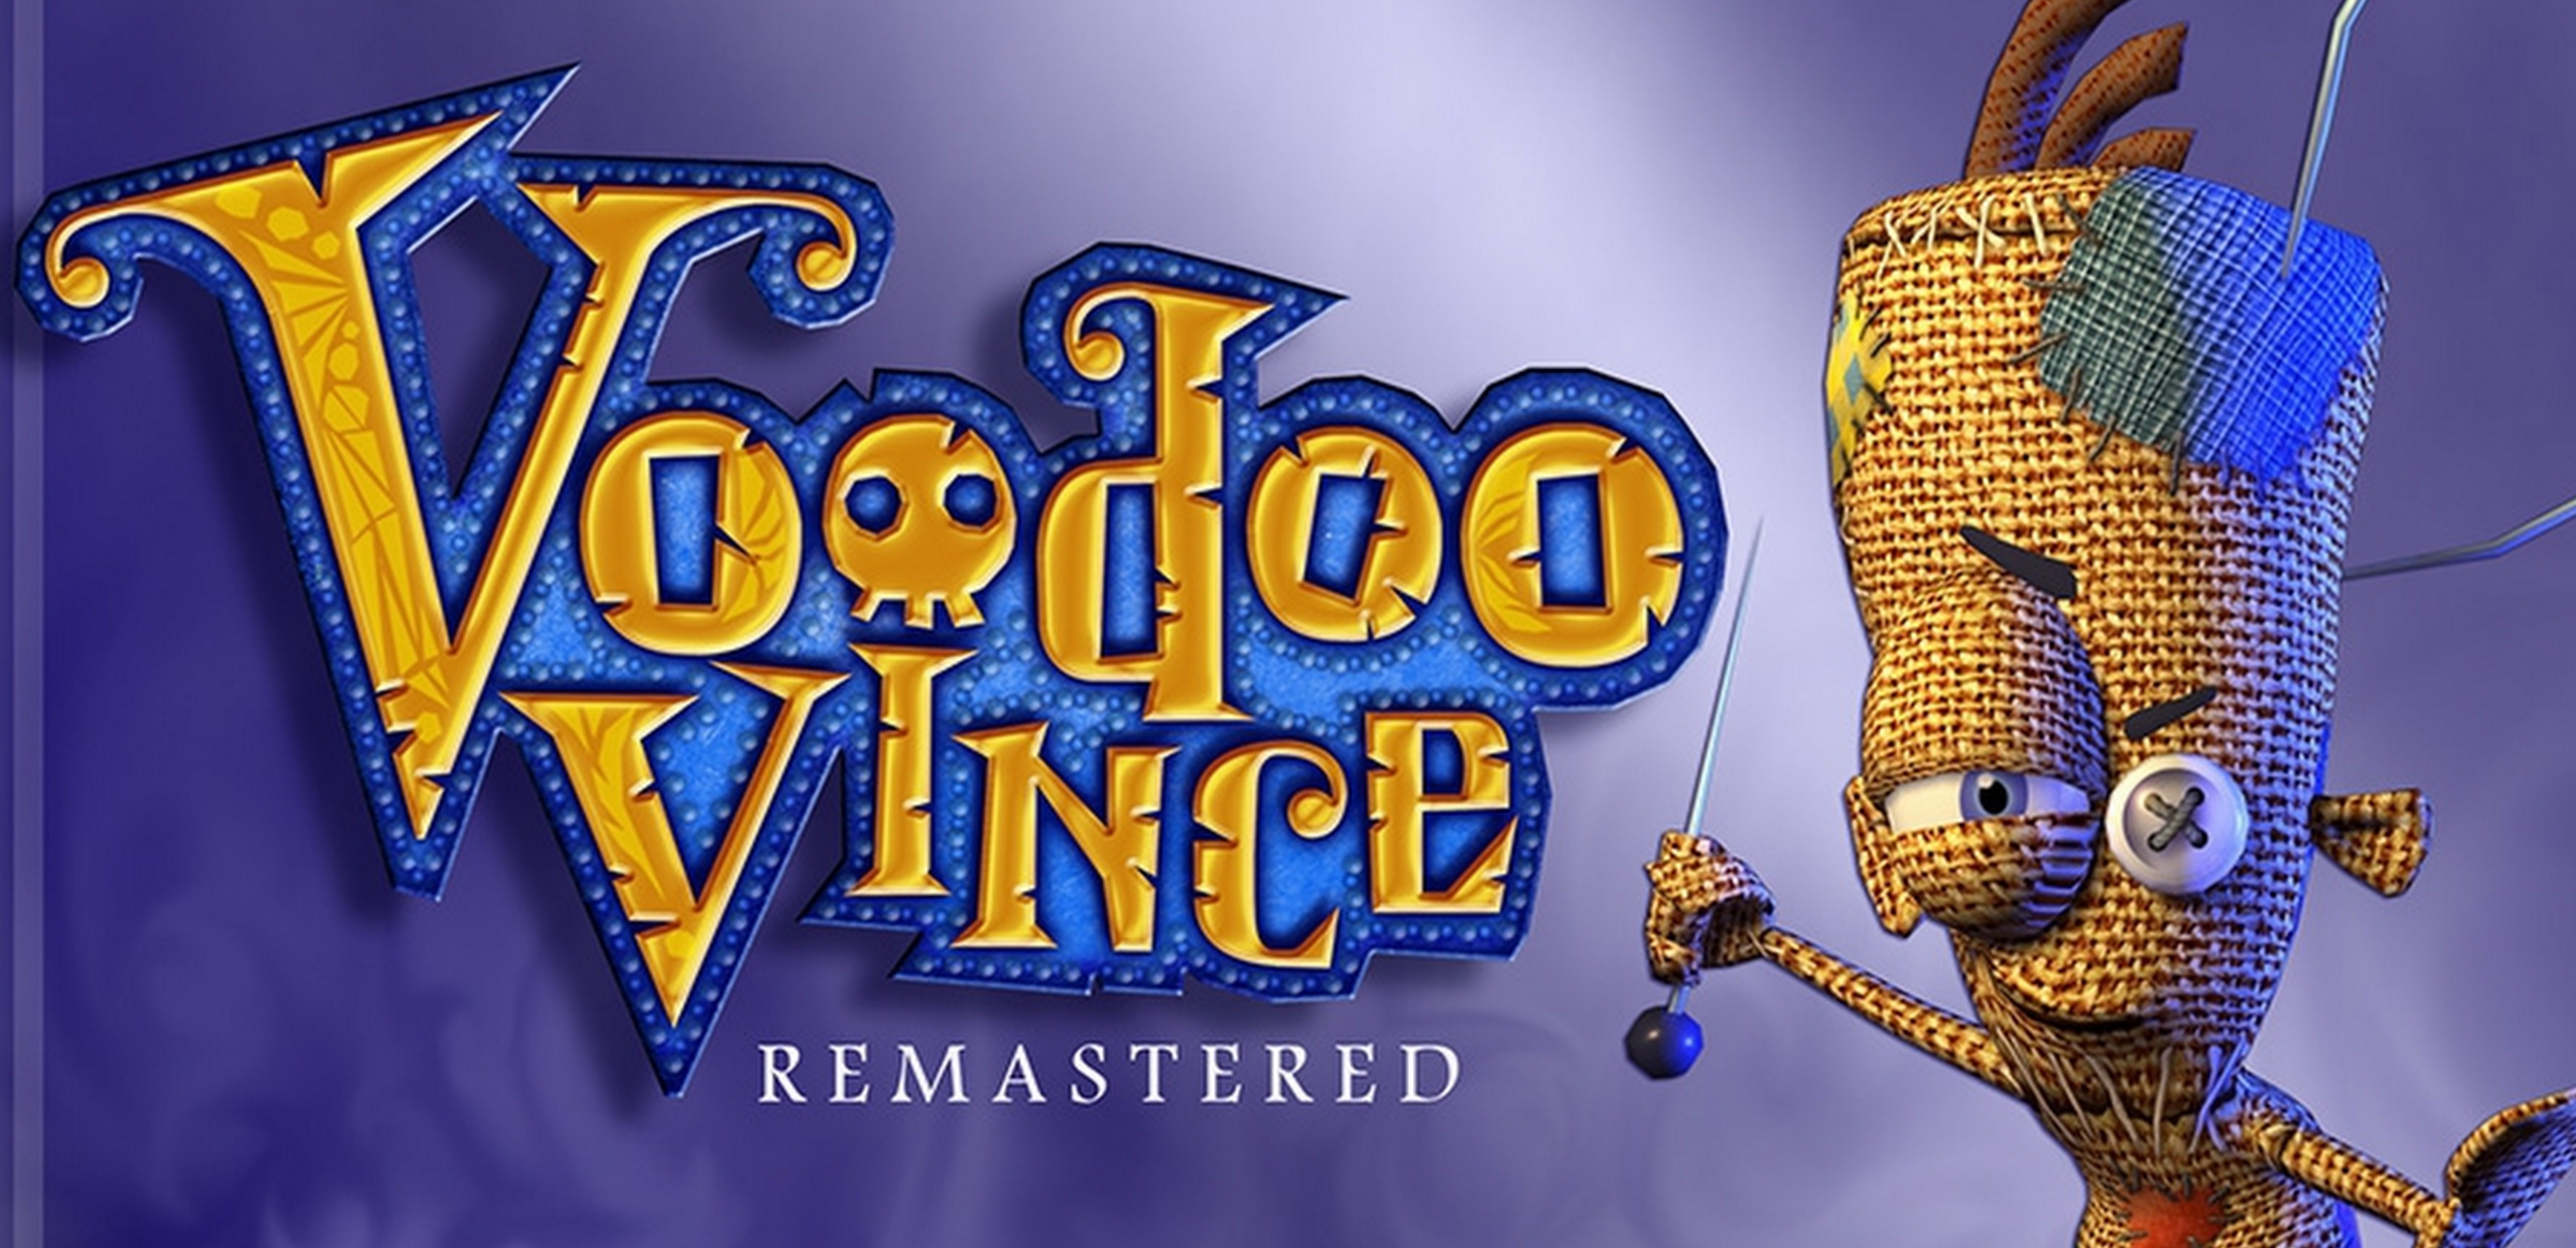 Voodoo Vince: Remastered launches today on Windows 10 and Xbox One